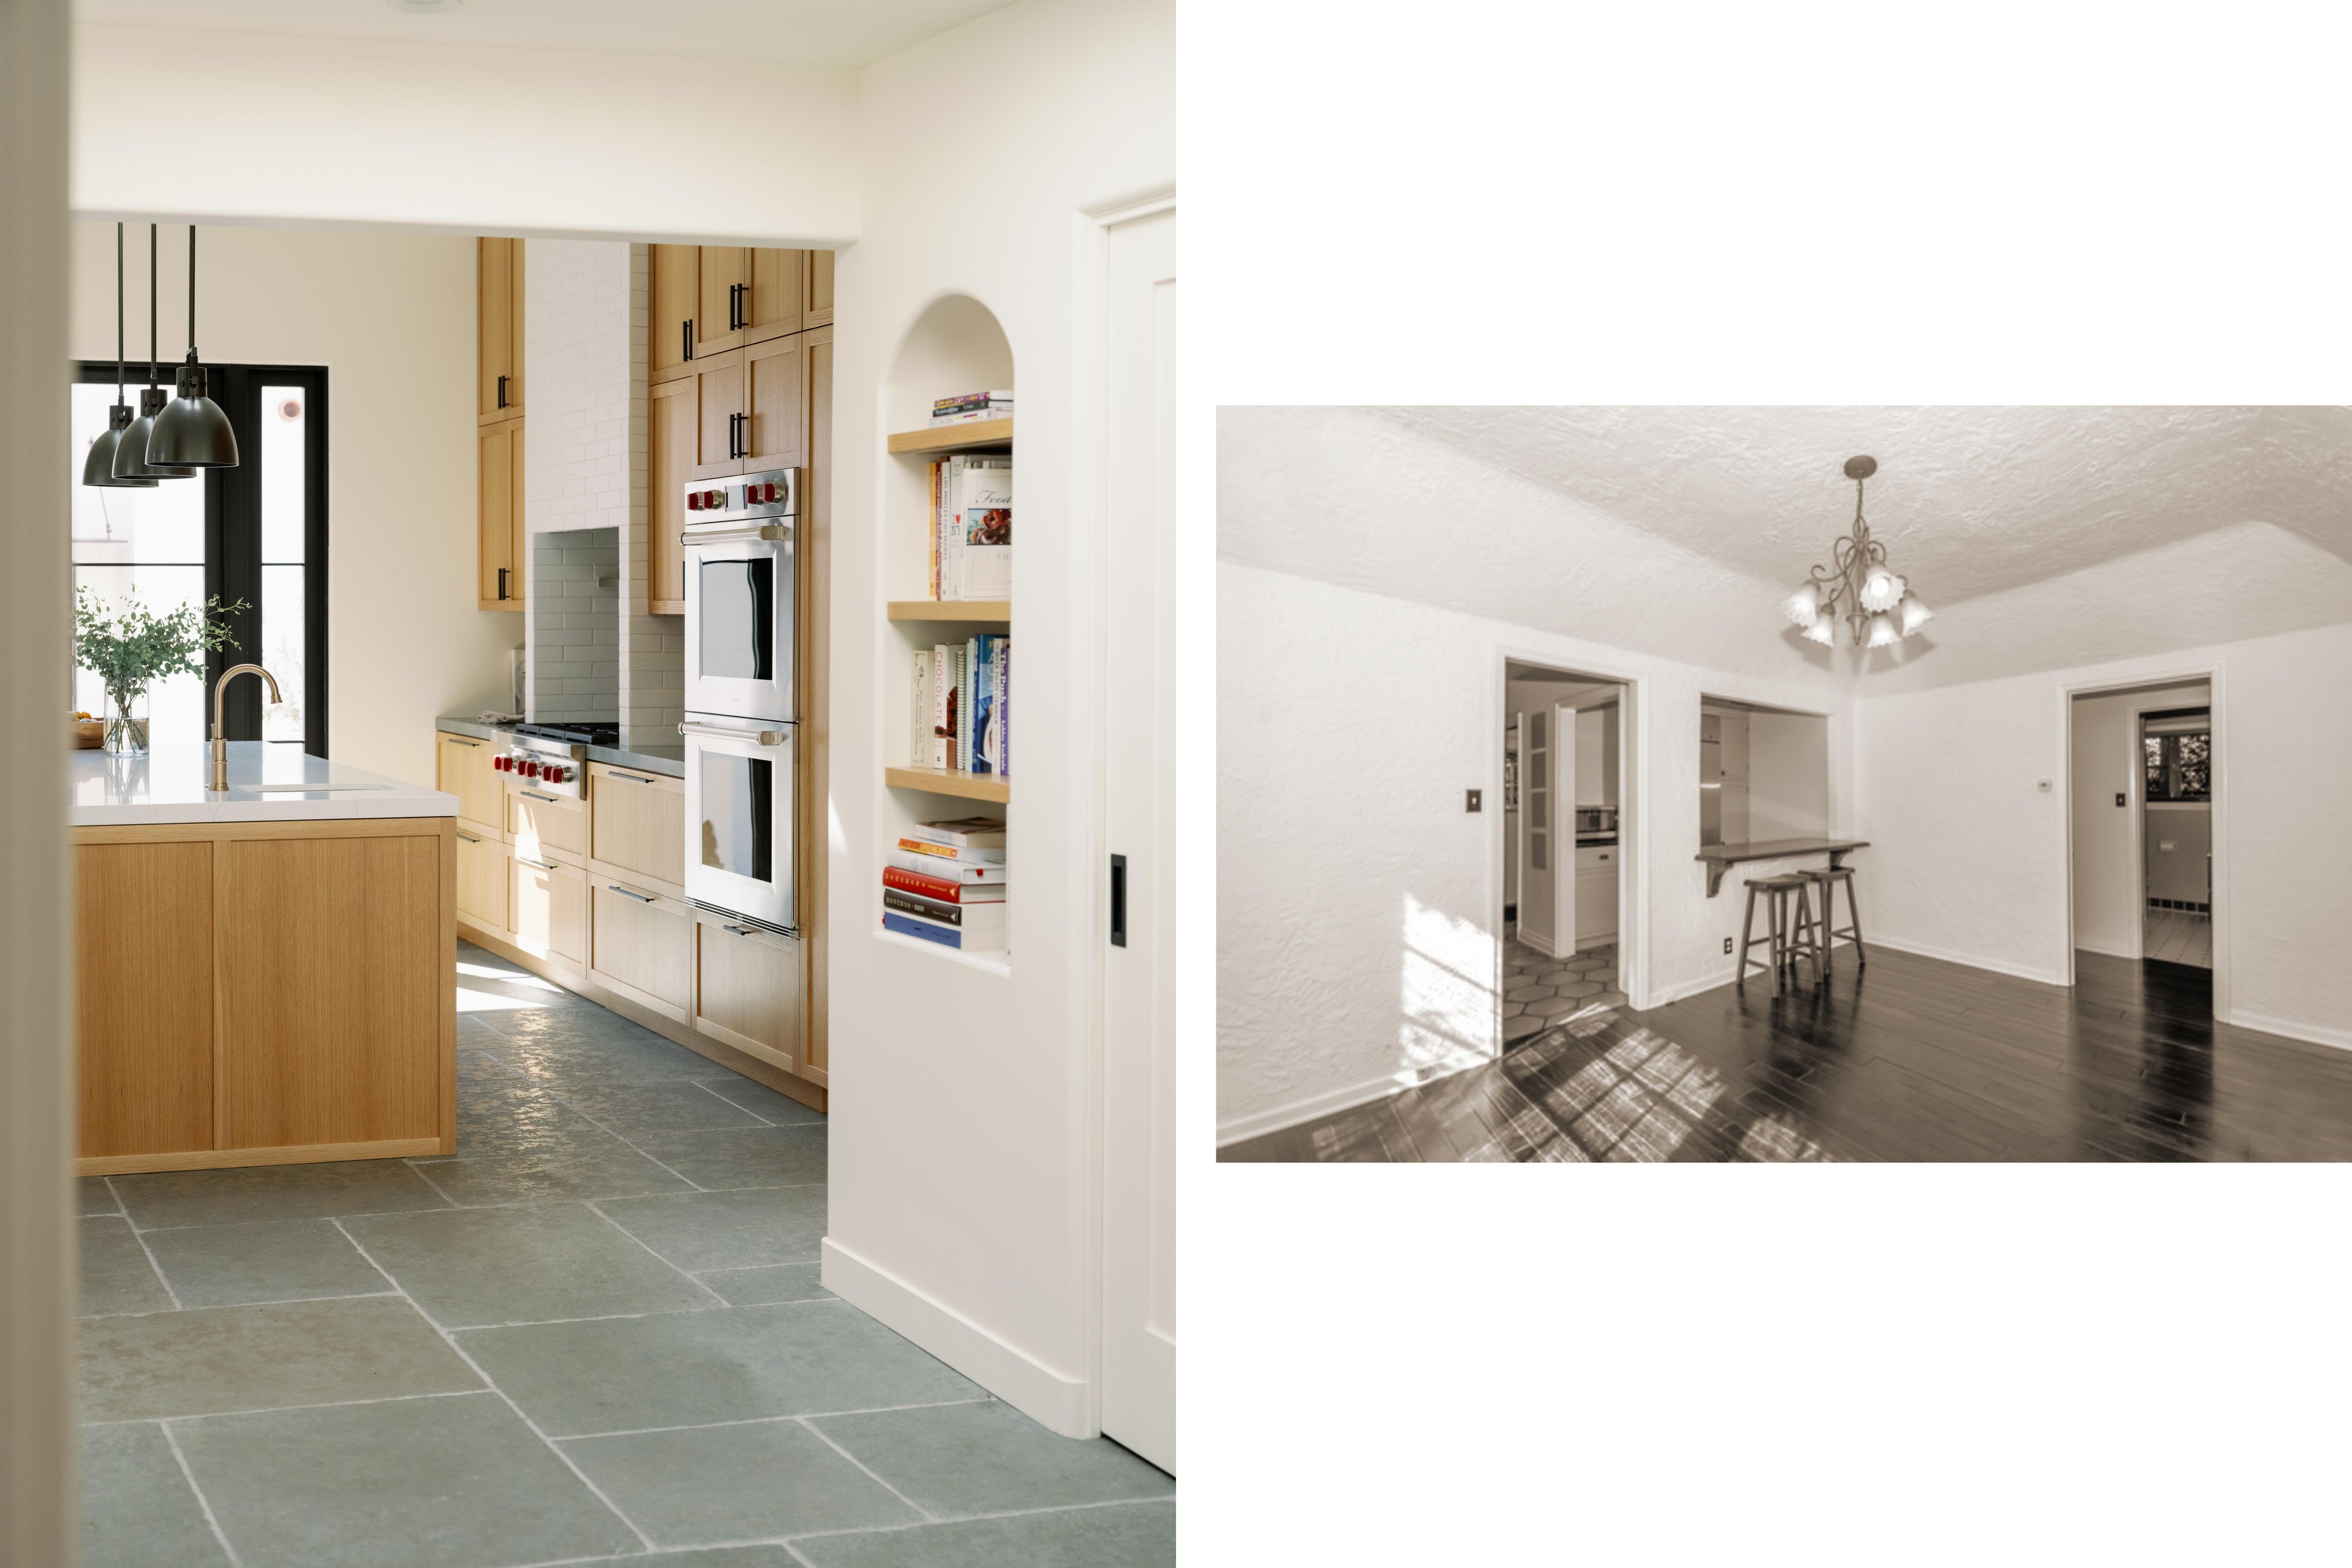 The kitchen layout was rearranged to accommodate a walk-in pantry and separate laundry room